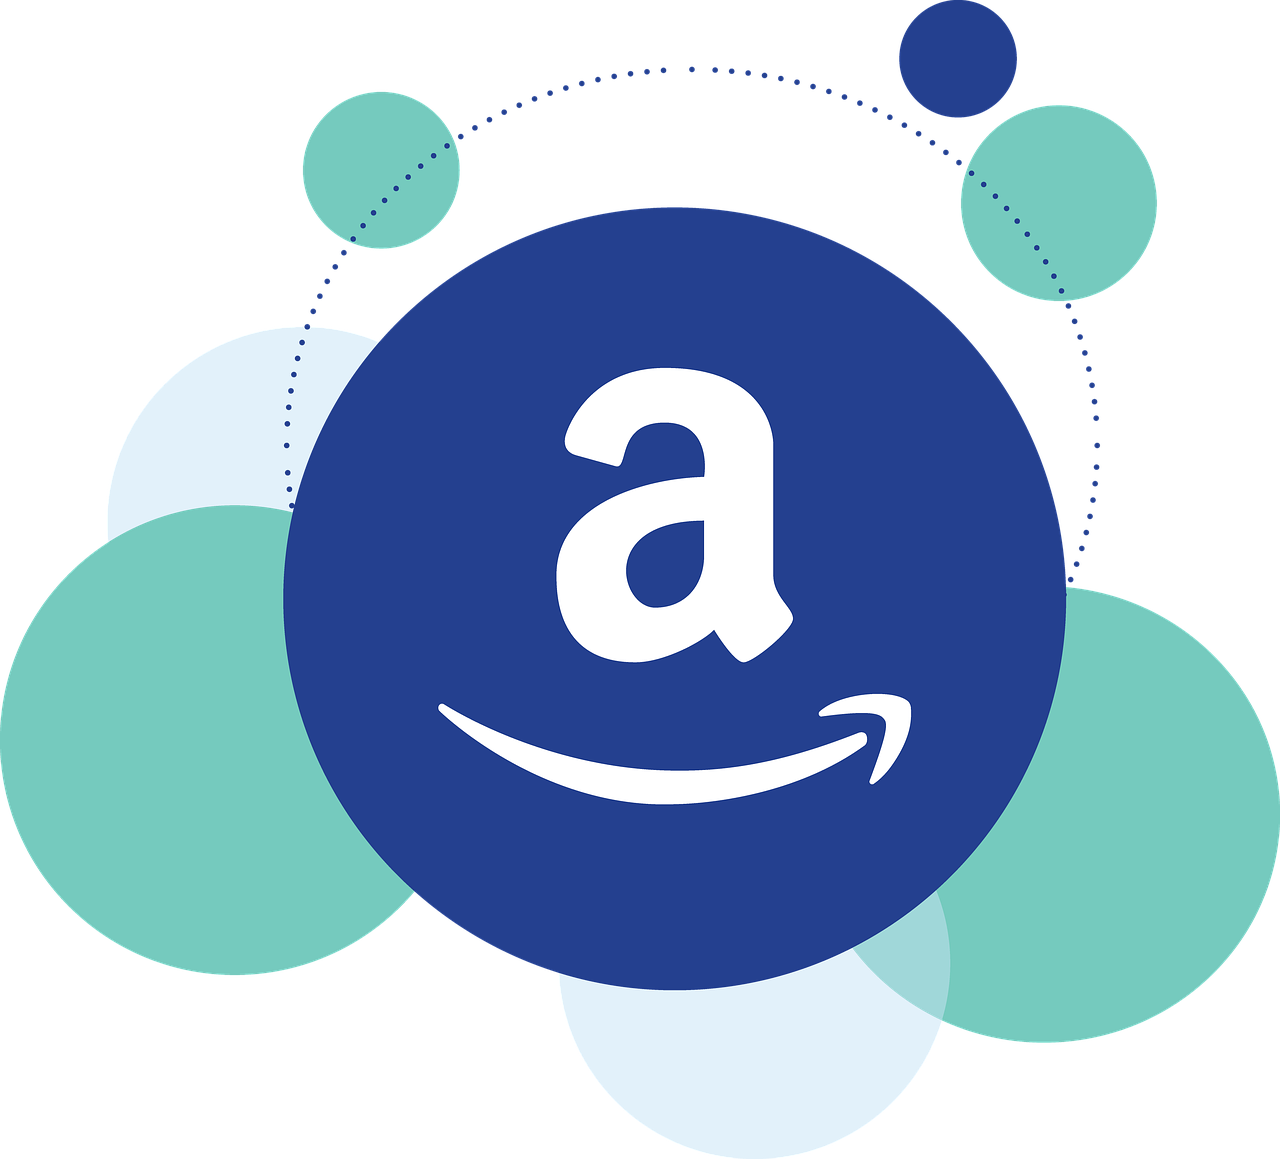 amazon-2183855_1280_kirstyfields_Pixabay.com_For broadening the Middle East Market, Amazon Payment Service and Zurich launched a Digitalized Payment Service App